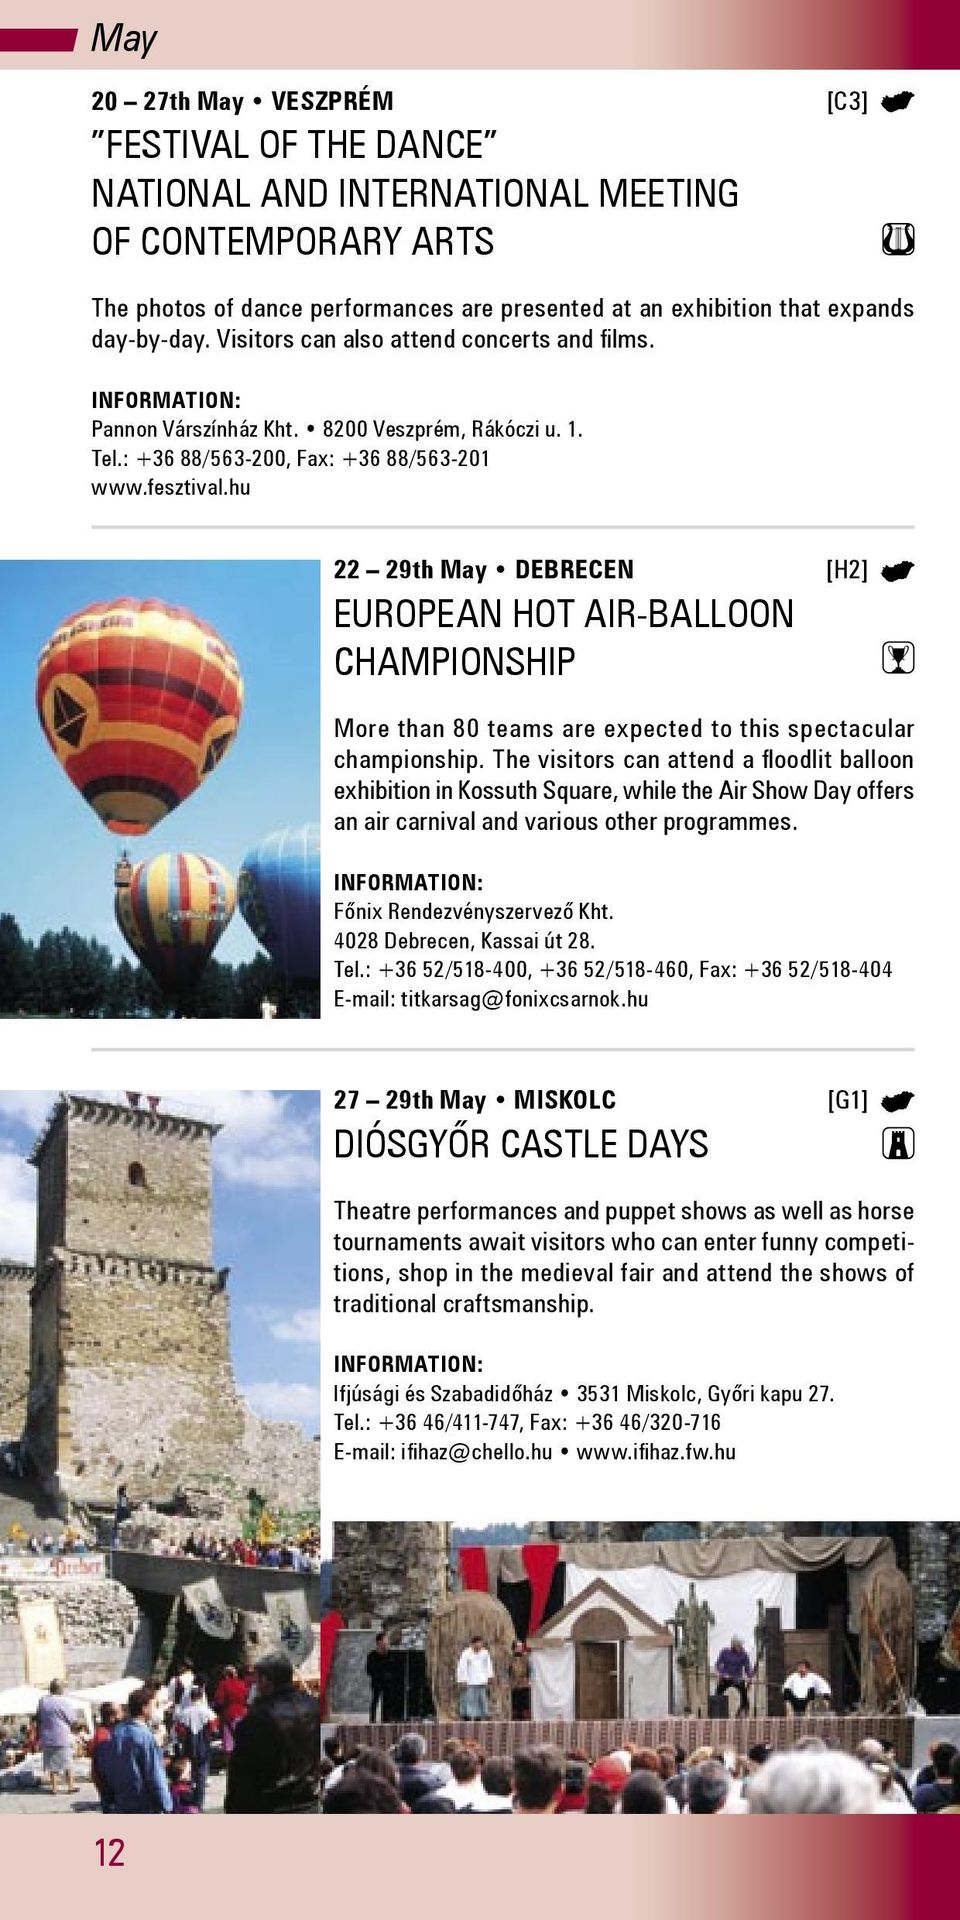 hu 22 29th May DEBRECEN [H2] EUROPEAN HOT AIR-BALLOON CHAMPIONSHIP More than 80 teams are expected to this spectacular championship.